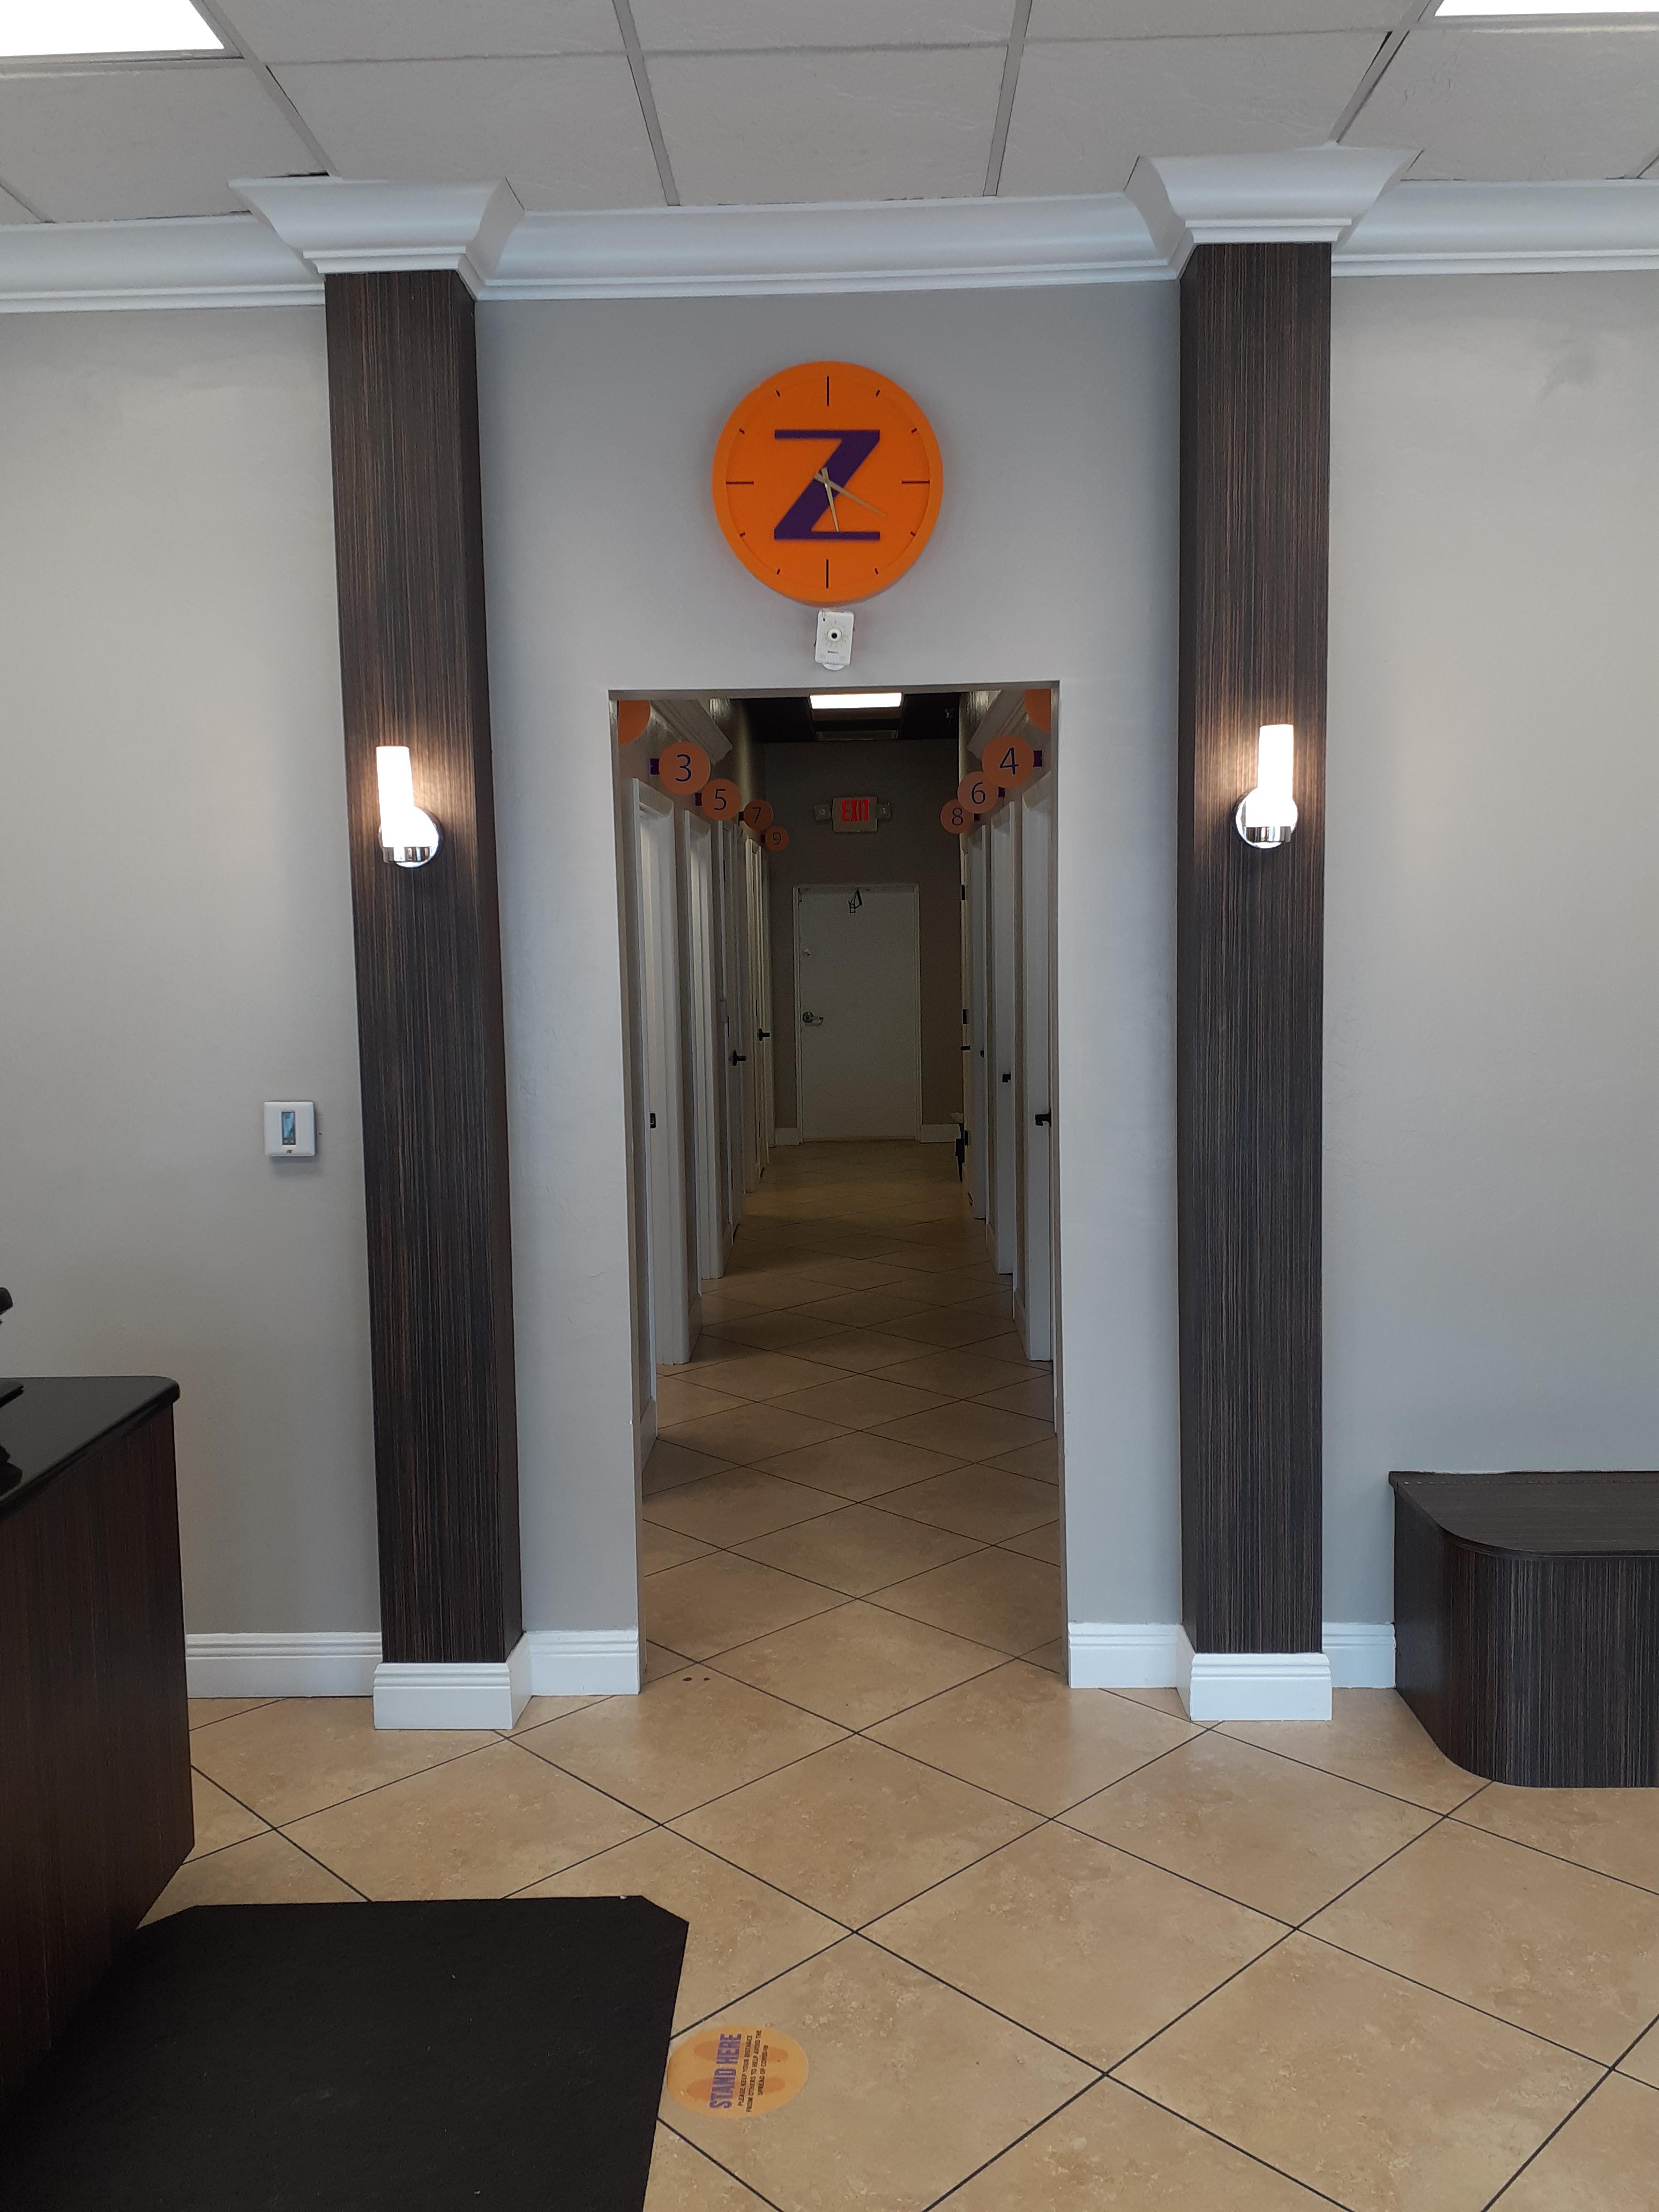 Zoom Tan hallway leading to tanning rooms in Tampa, FL